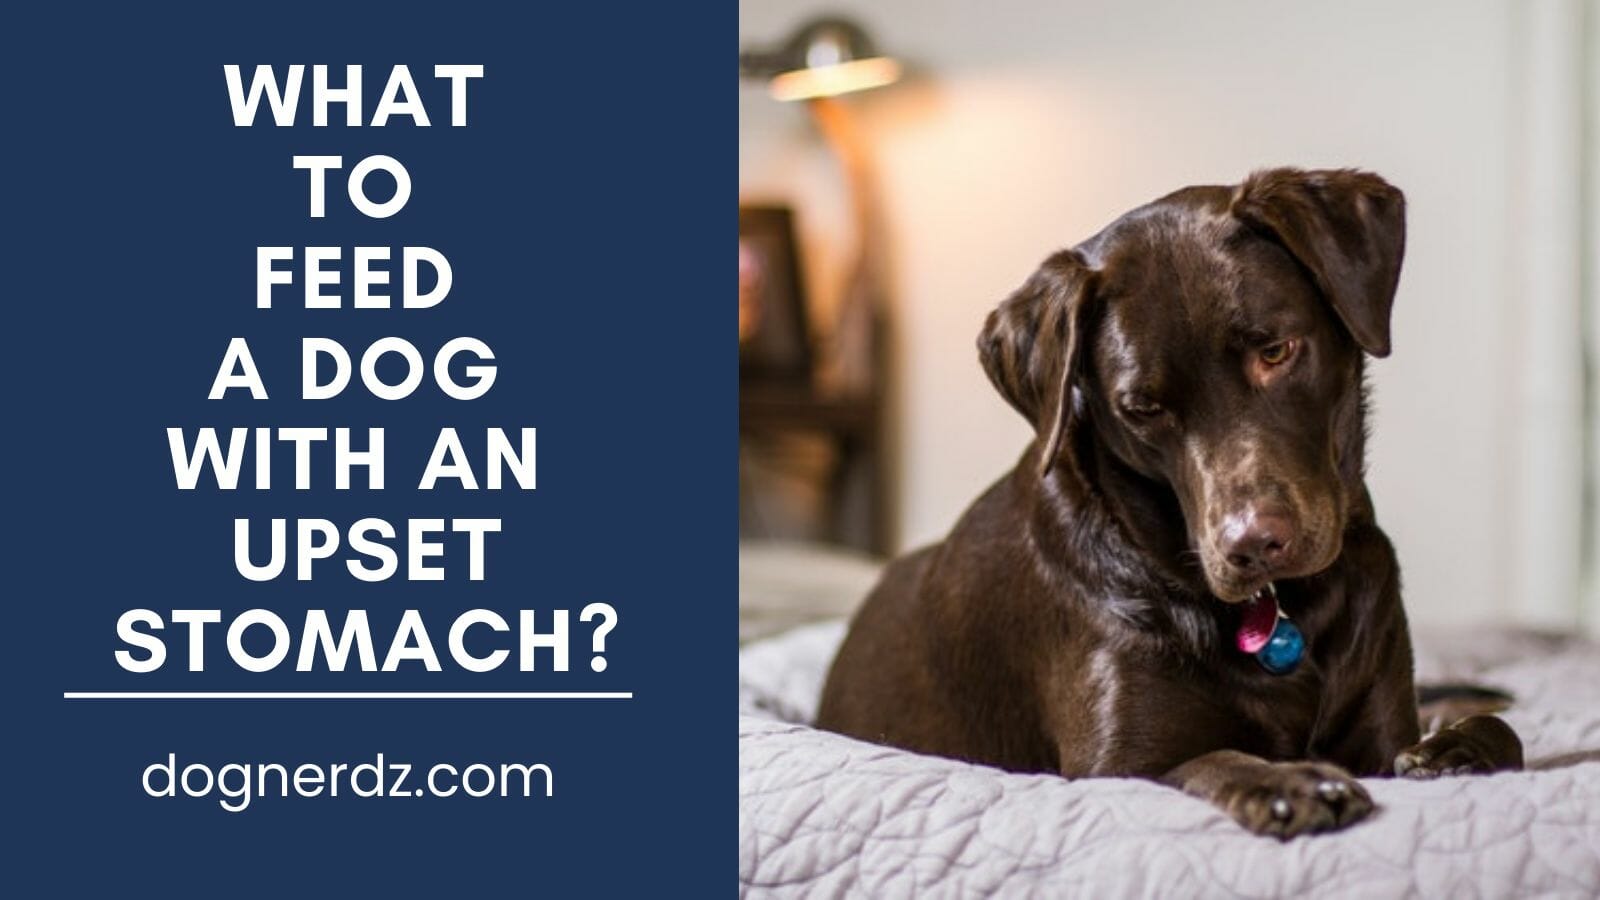 What to Feed a Dog With an Upset Stomach